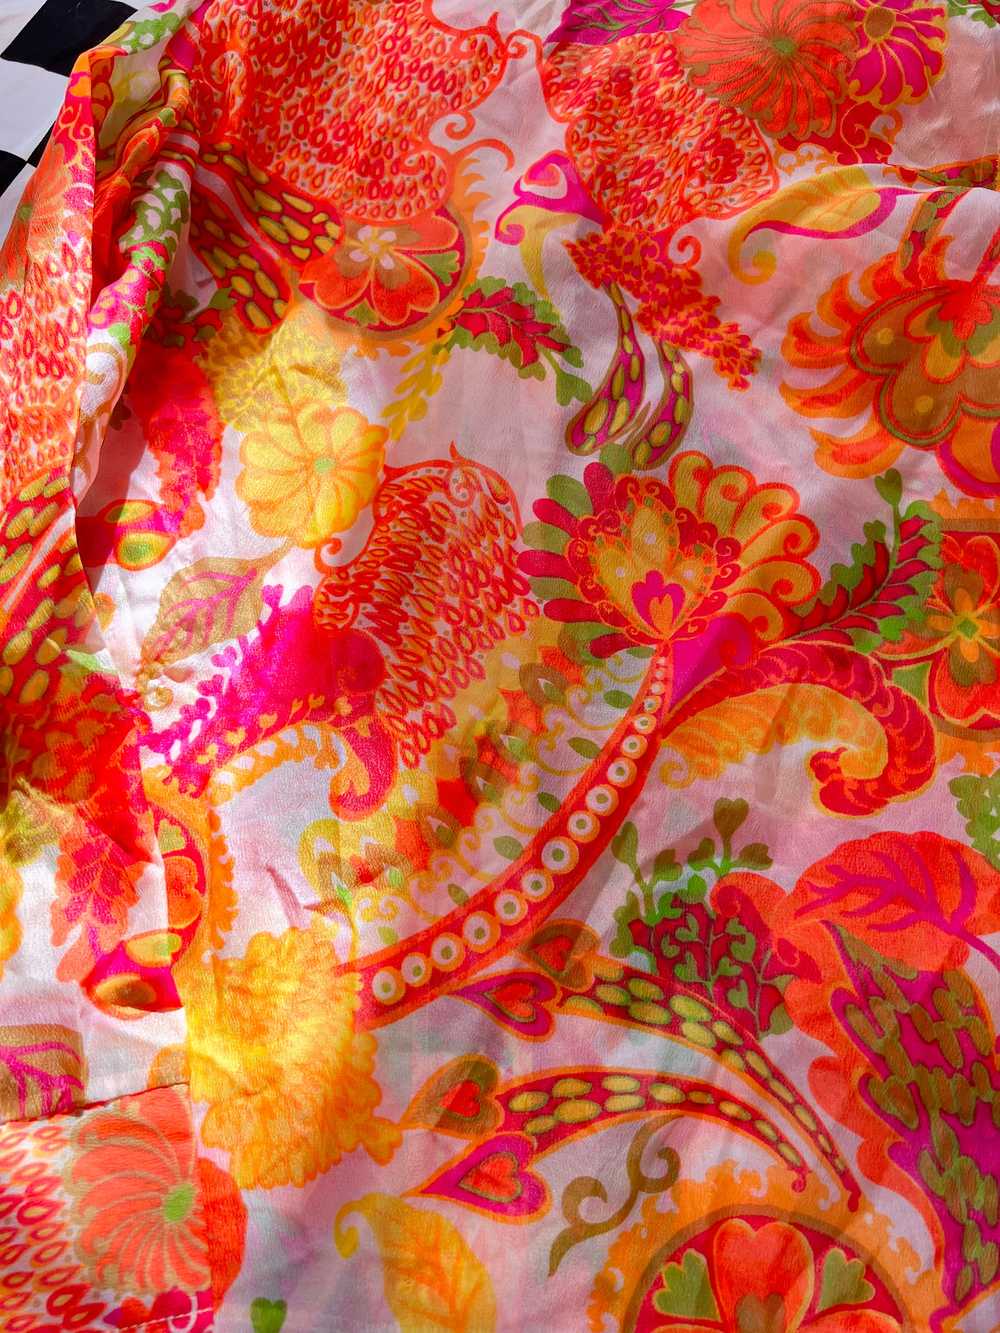 70’s Sheer Crepe Psychedelic Neon Paisley Floral … - image 7